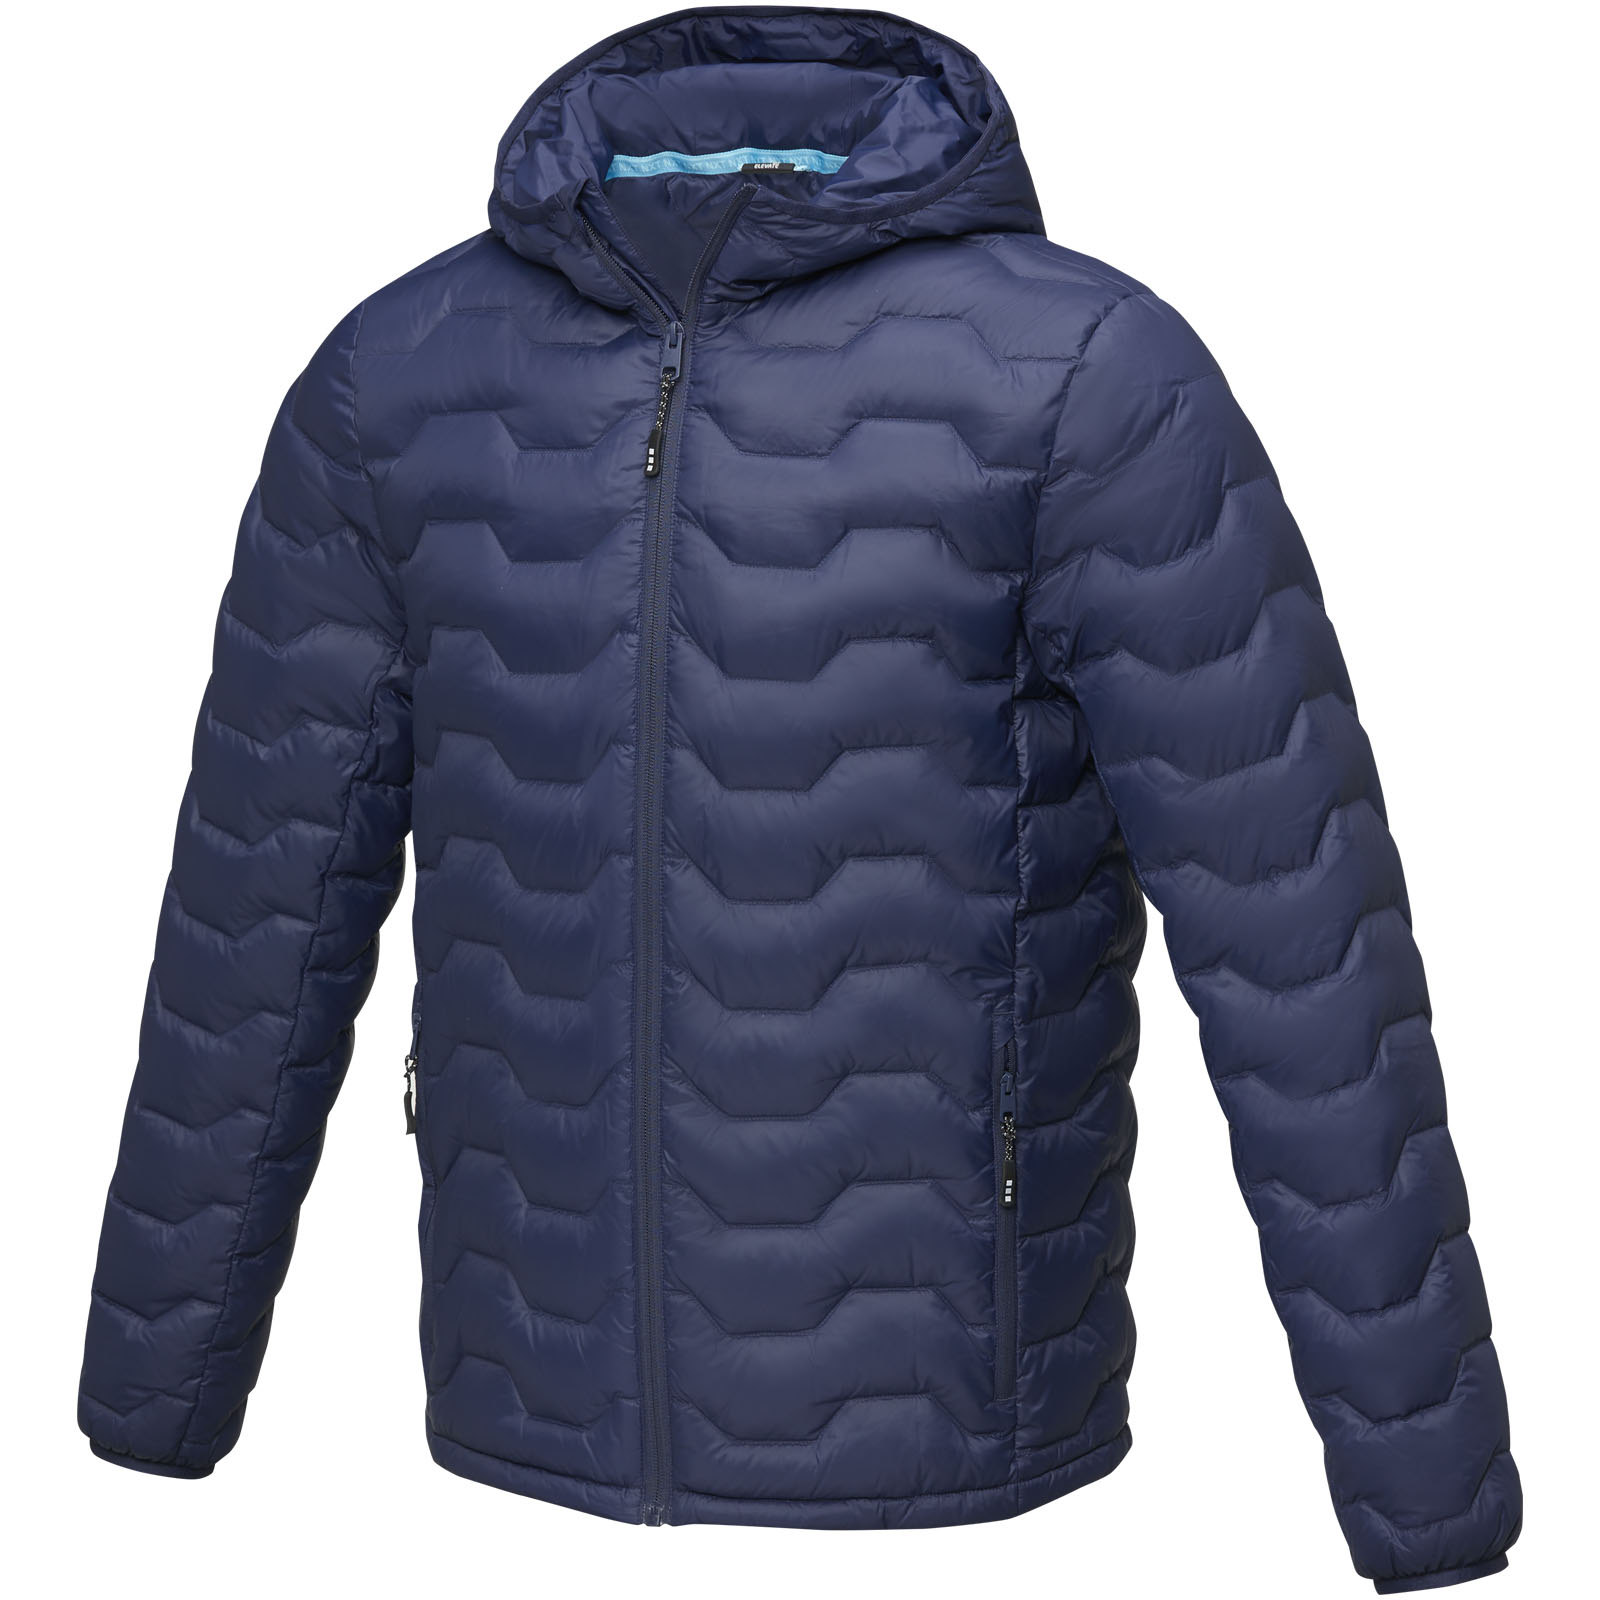 Advertising Jackets - Petalite men's GRS recycled insulated down jacket